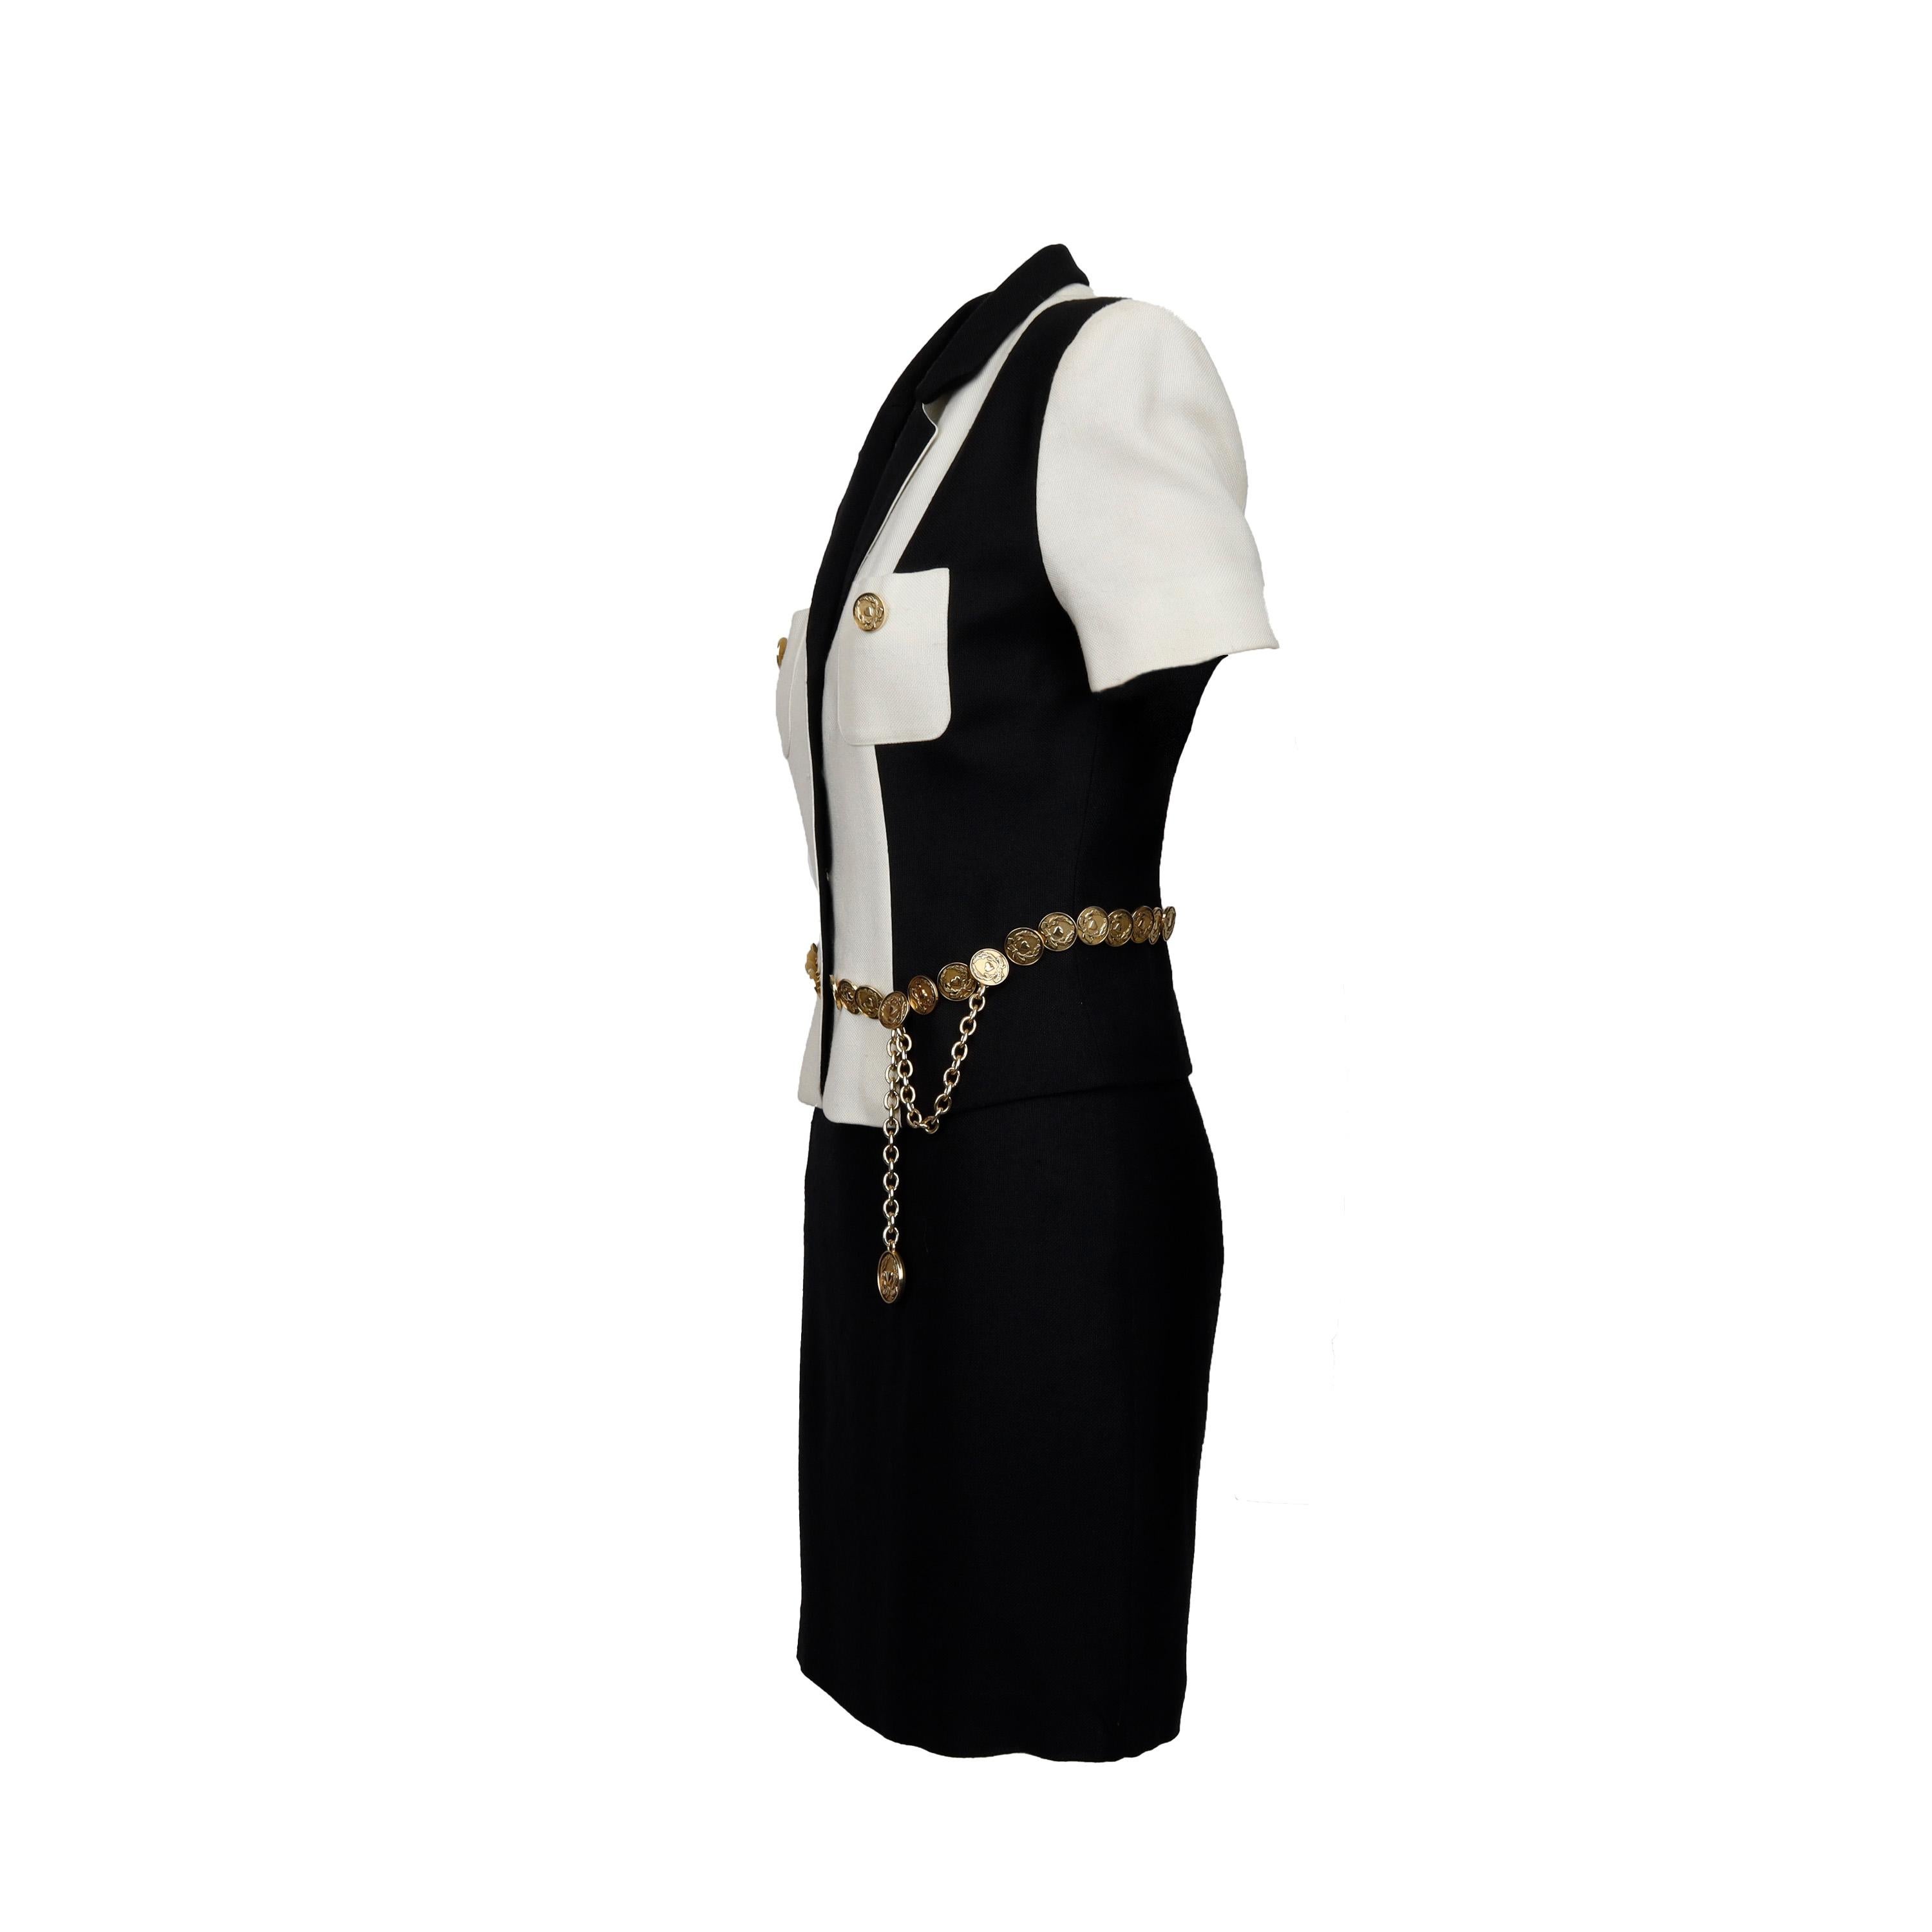 This Moschino Cheap and Chic black and white jacket and skirt set features an eye-catching gold-colored metal coin belt to accentuate the waist and add a touch of vintage to the classic 80s silhouette. Double pockets with the same coin buttons on